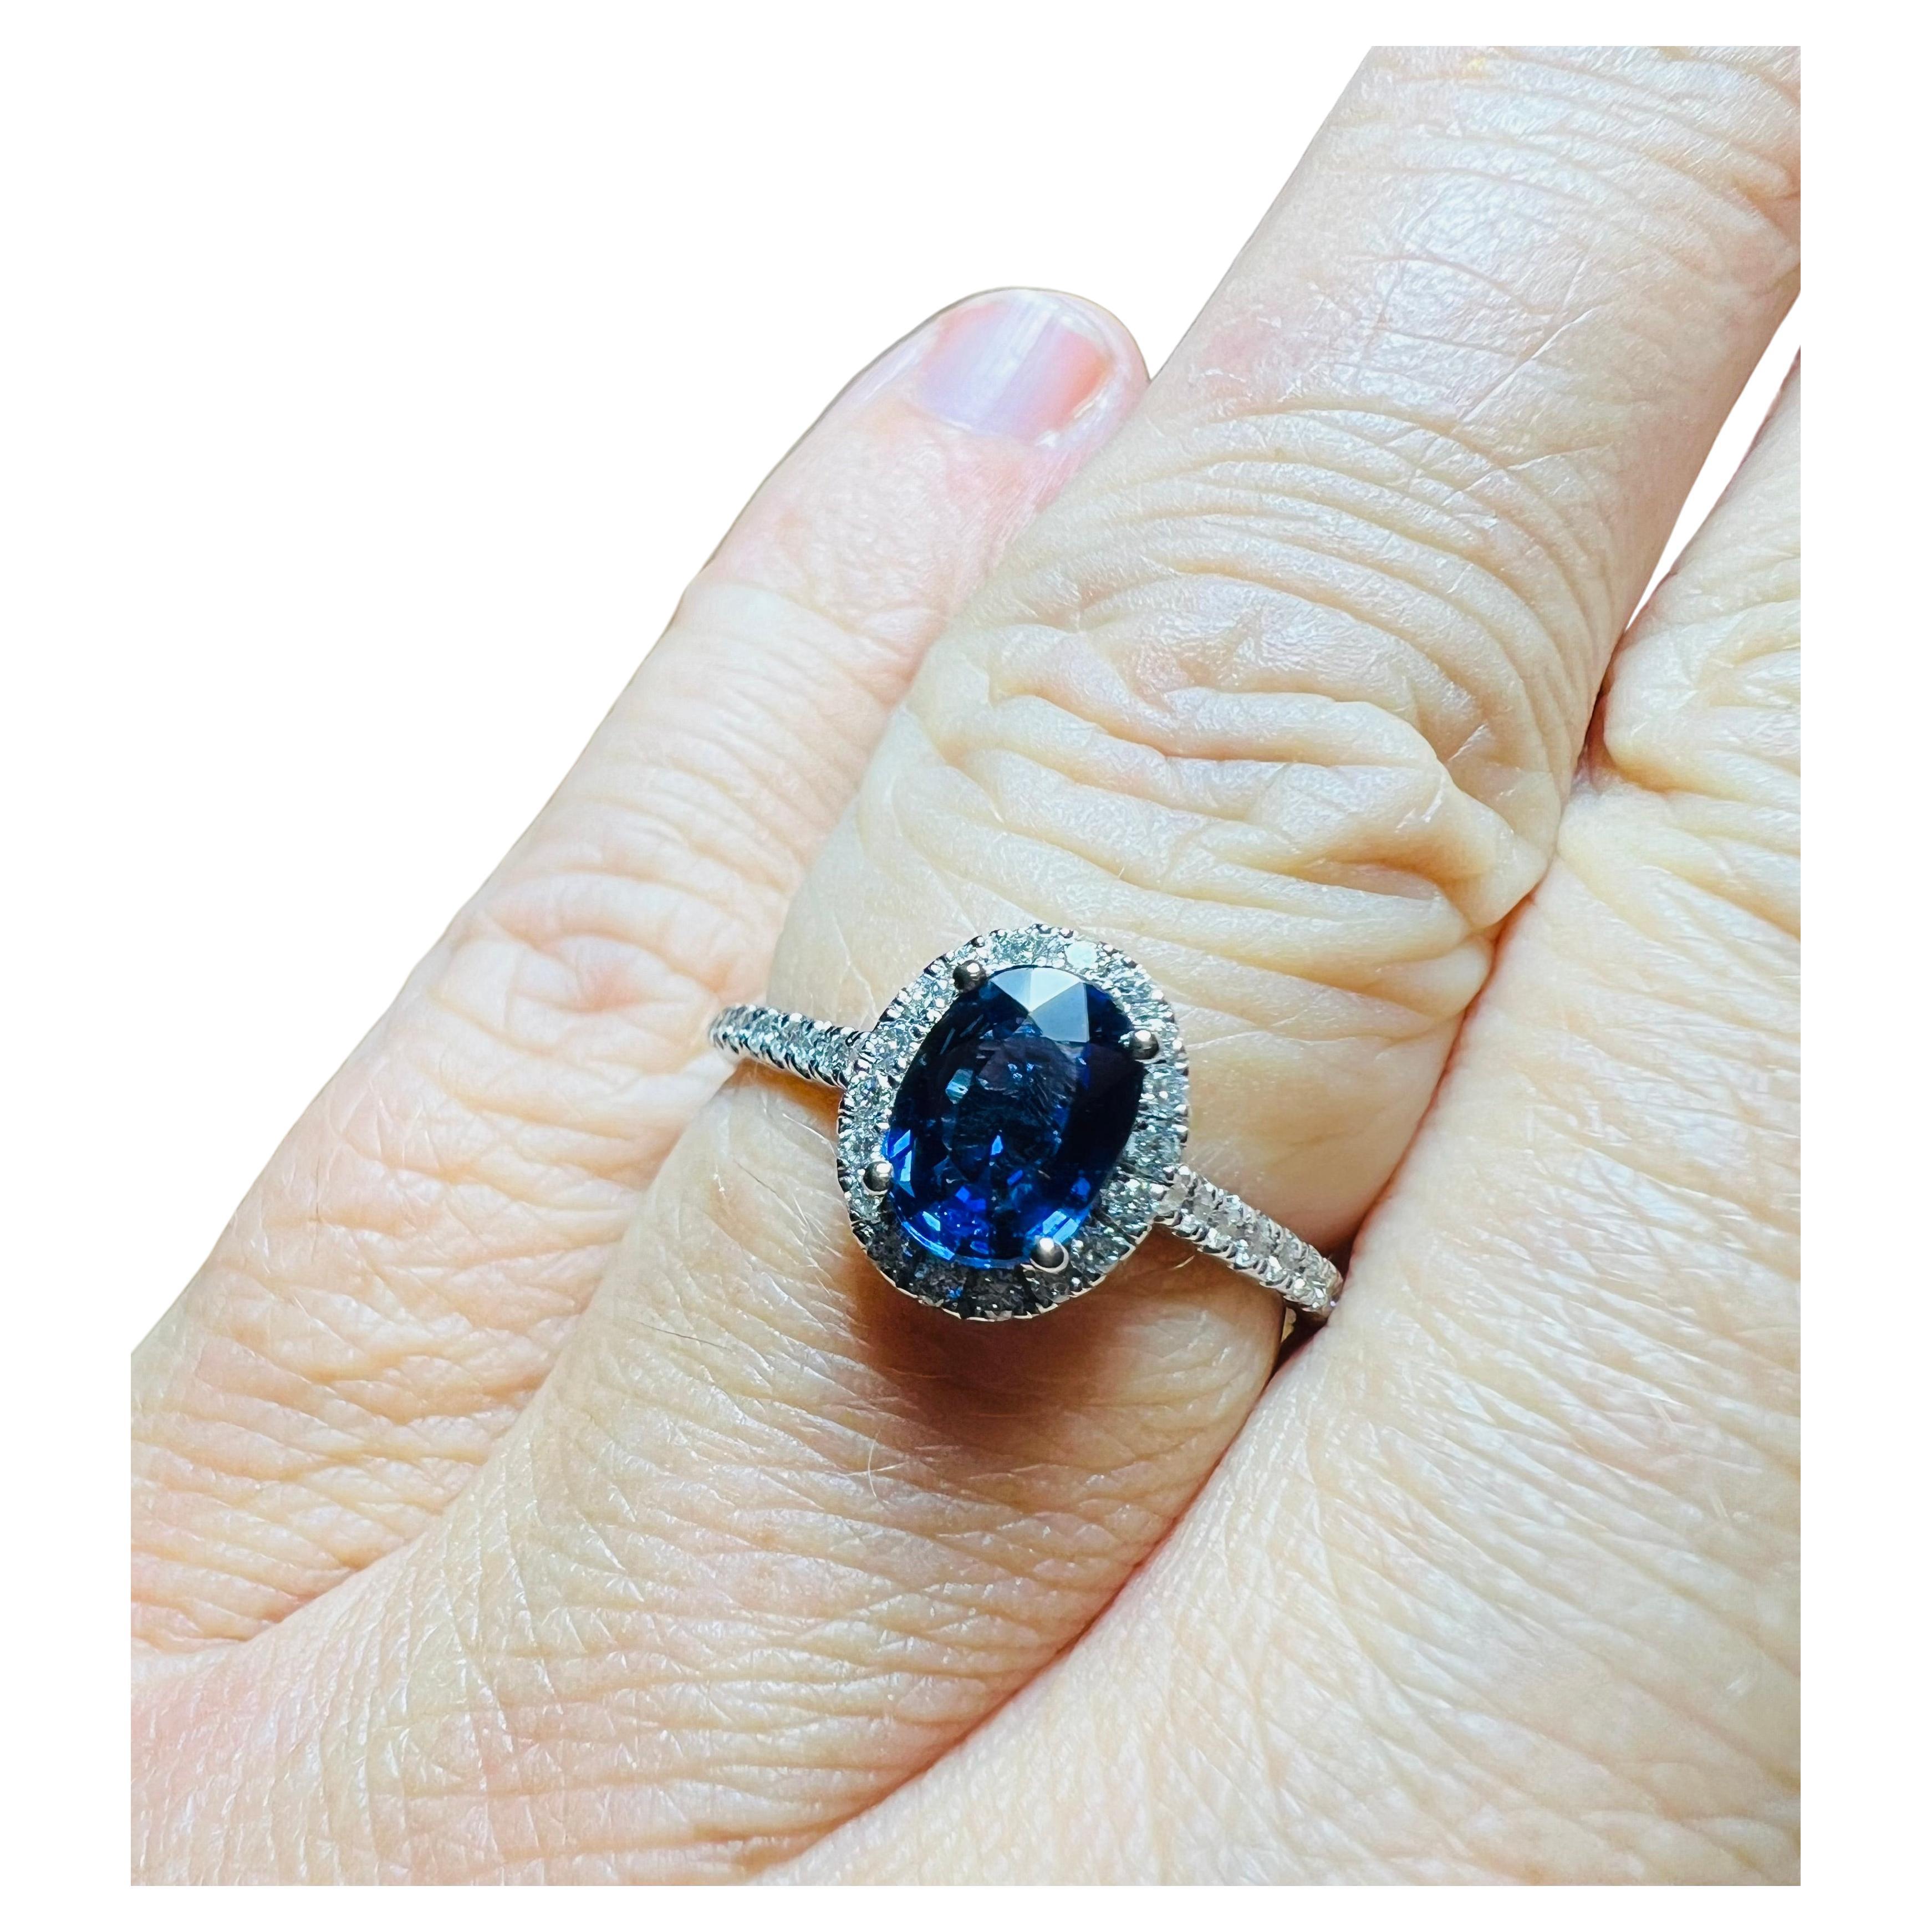 Ring Set With A Sapphire Surrounded By Diamonds, 18 Carat Gold